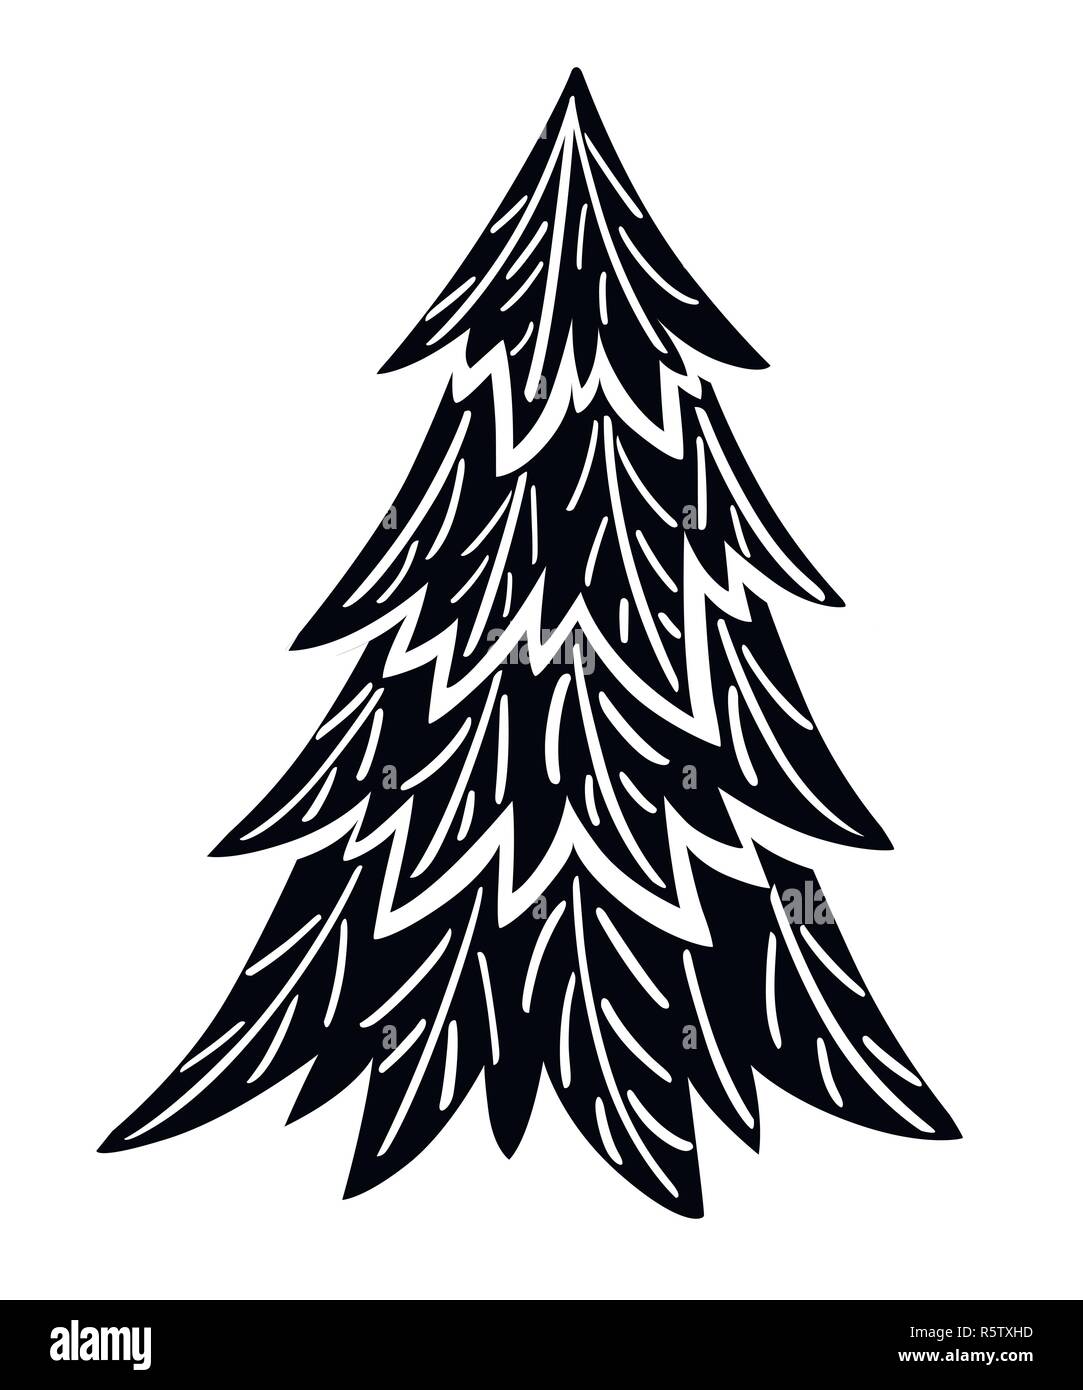 Black silhouette. Spruce tree. Evergreen flat style. Christmas tree without decorations. Vector illustration isolated on white background. Stock Vector